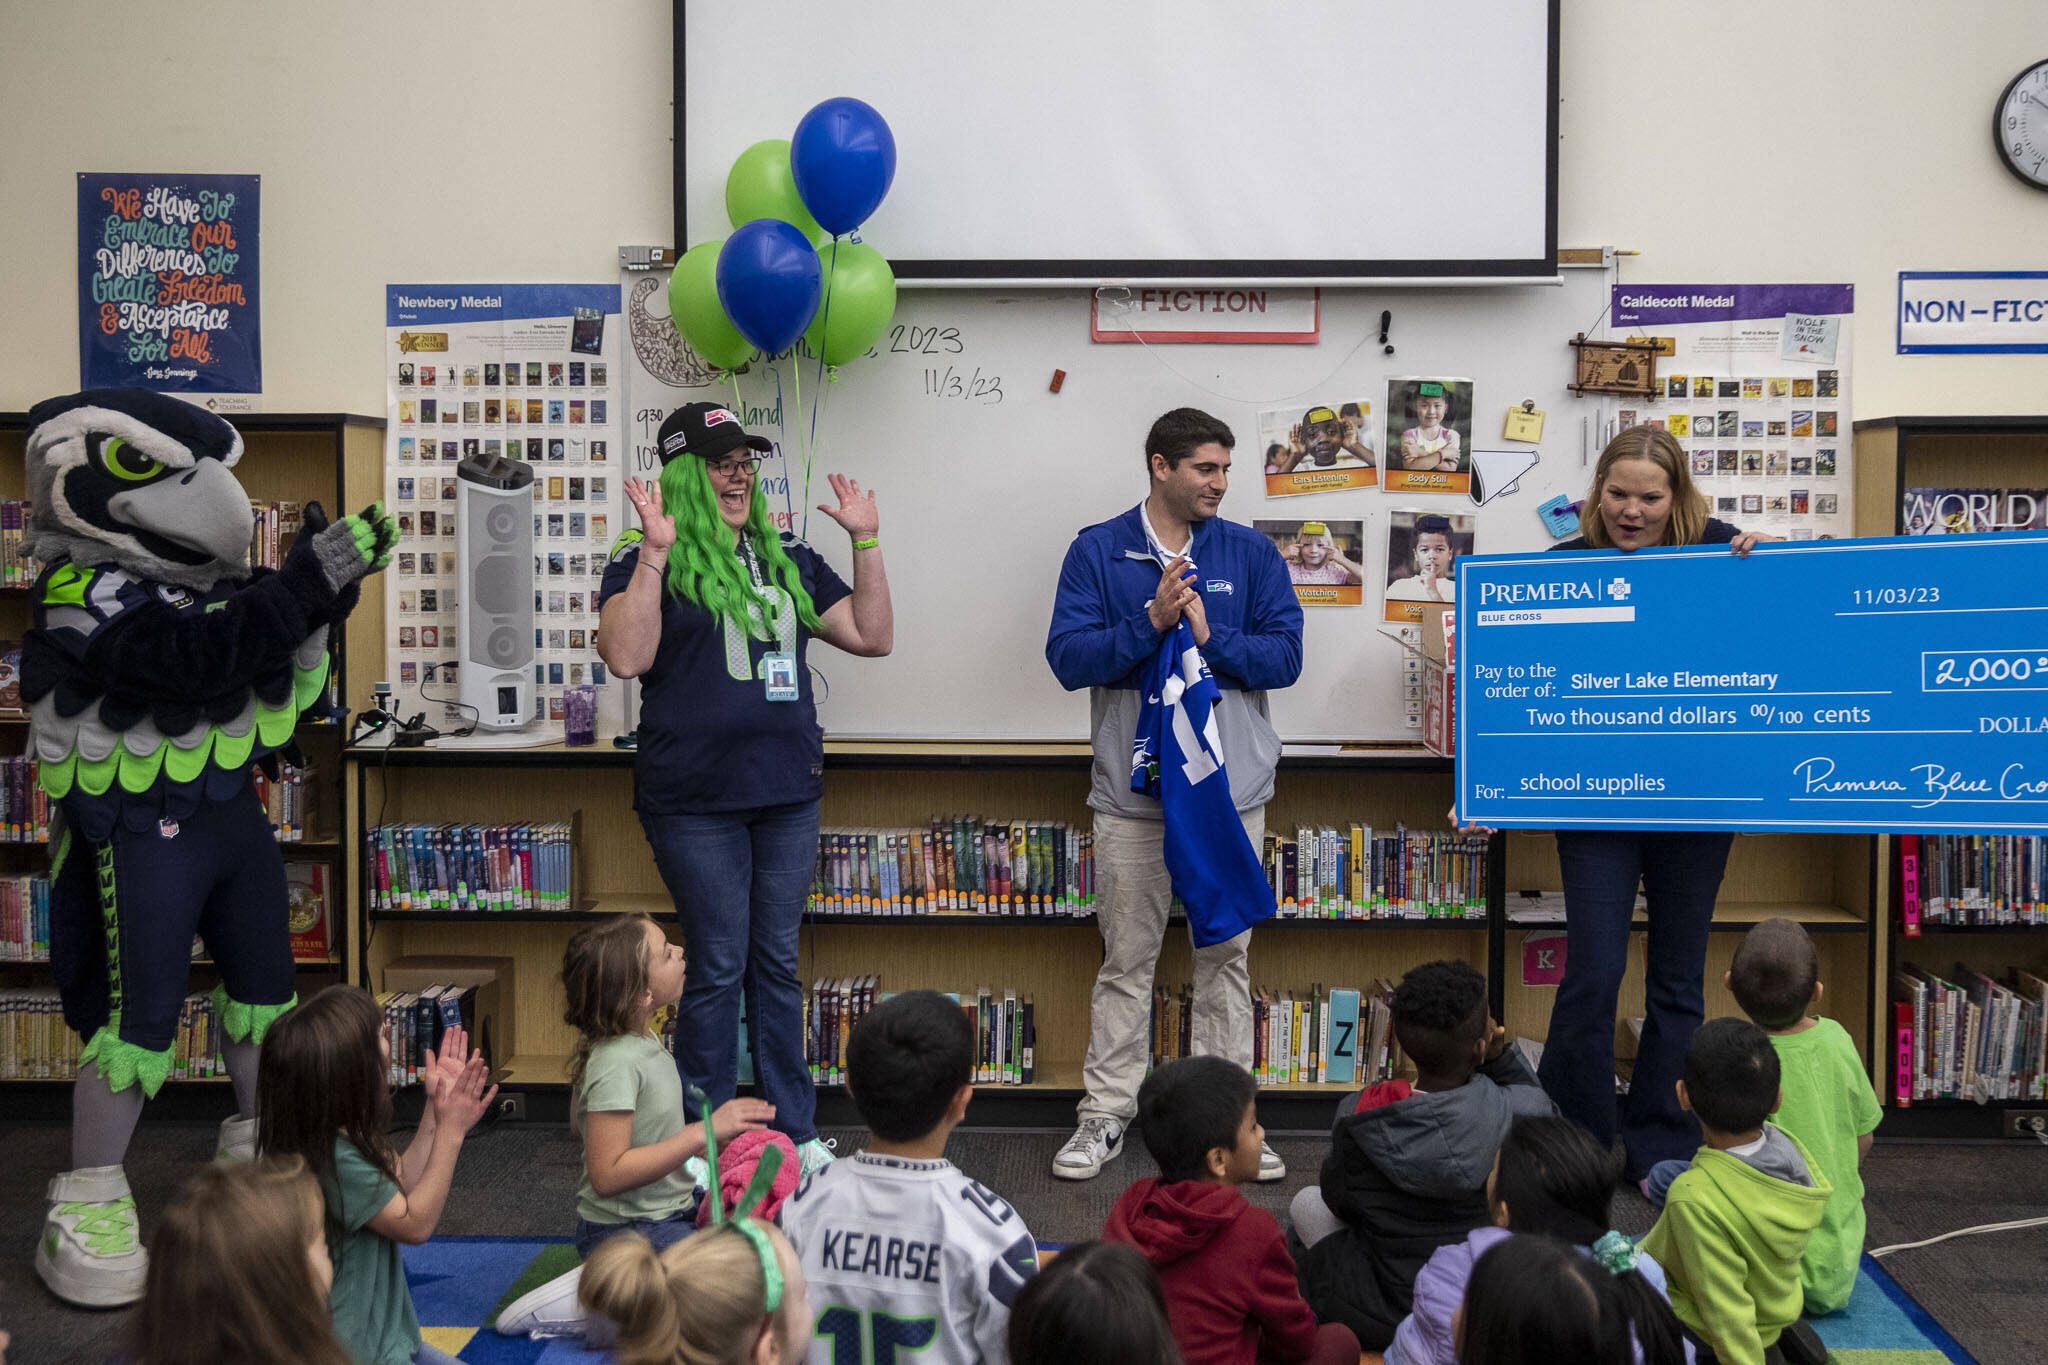 Crystal Moore, second from left, and her class are surprised with a $2,000 cash donation through the Primera Heroes in the Classroom program at Silver Lake Elementary in Everett, Washington on Friday, Nov. 3, 2023. (Annie Barker / The Herald)